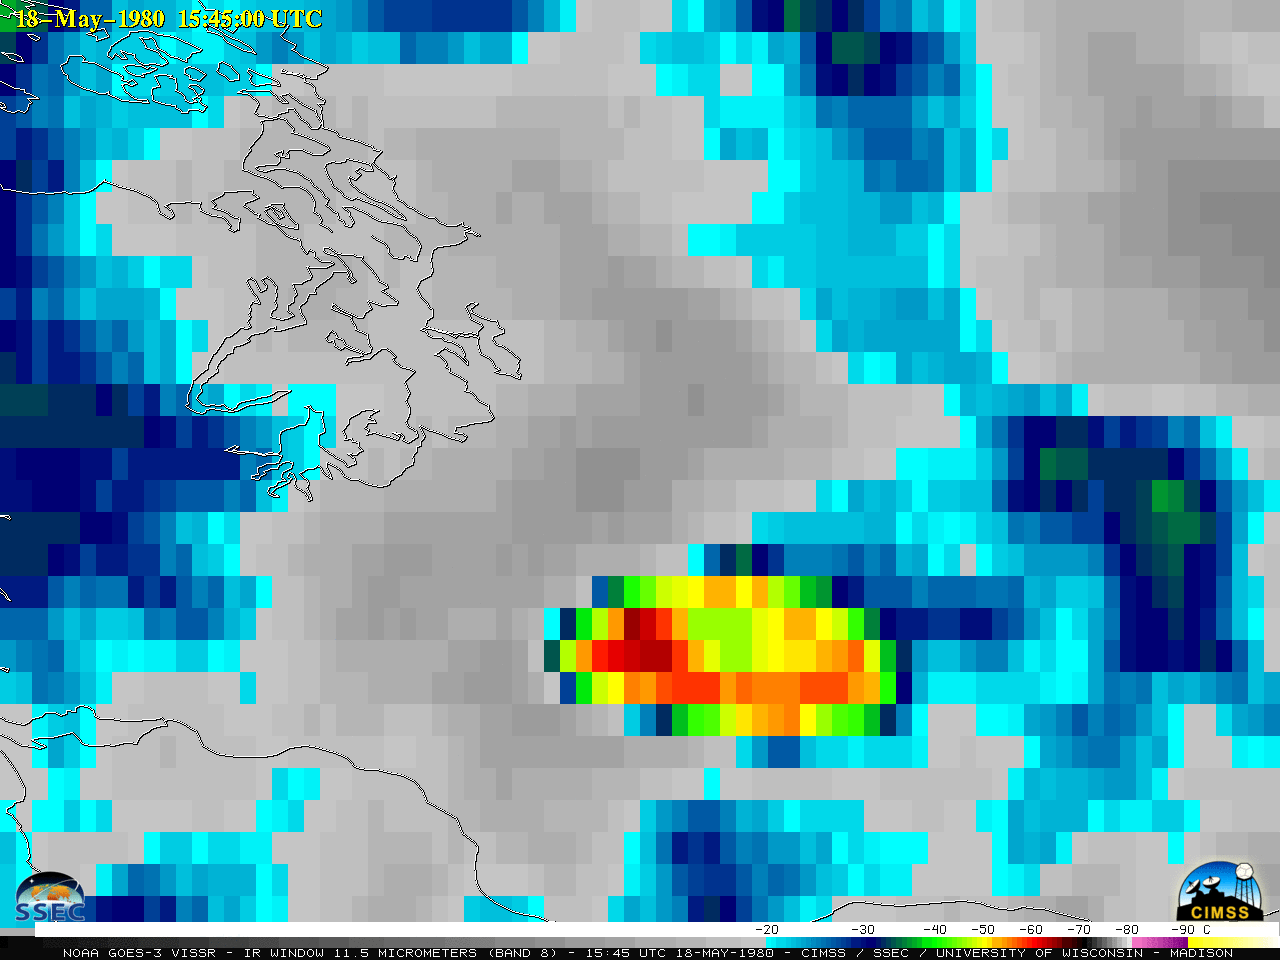 GOES-3 Infrared (11.5 µm) image at 1545 UTC [click to enlarge]